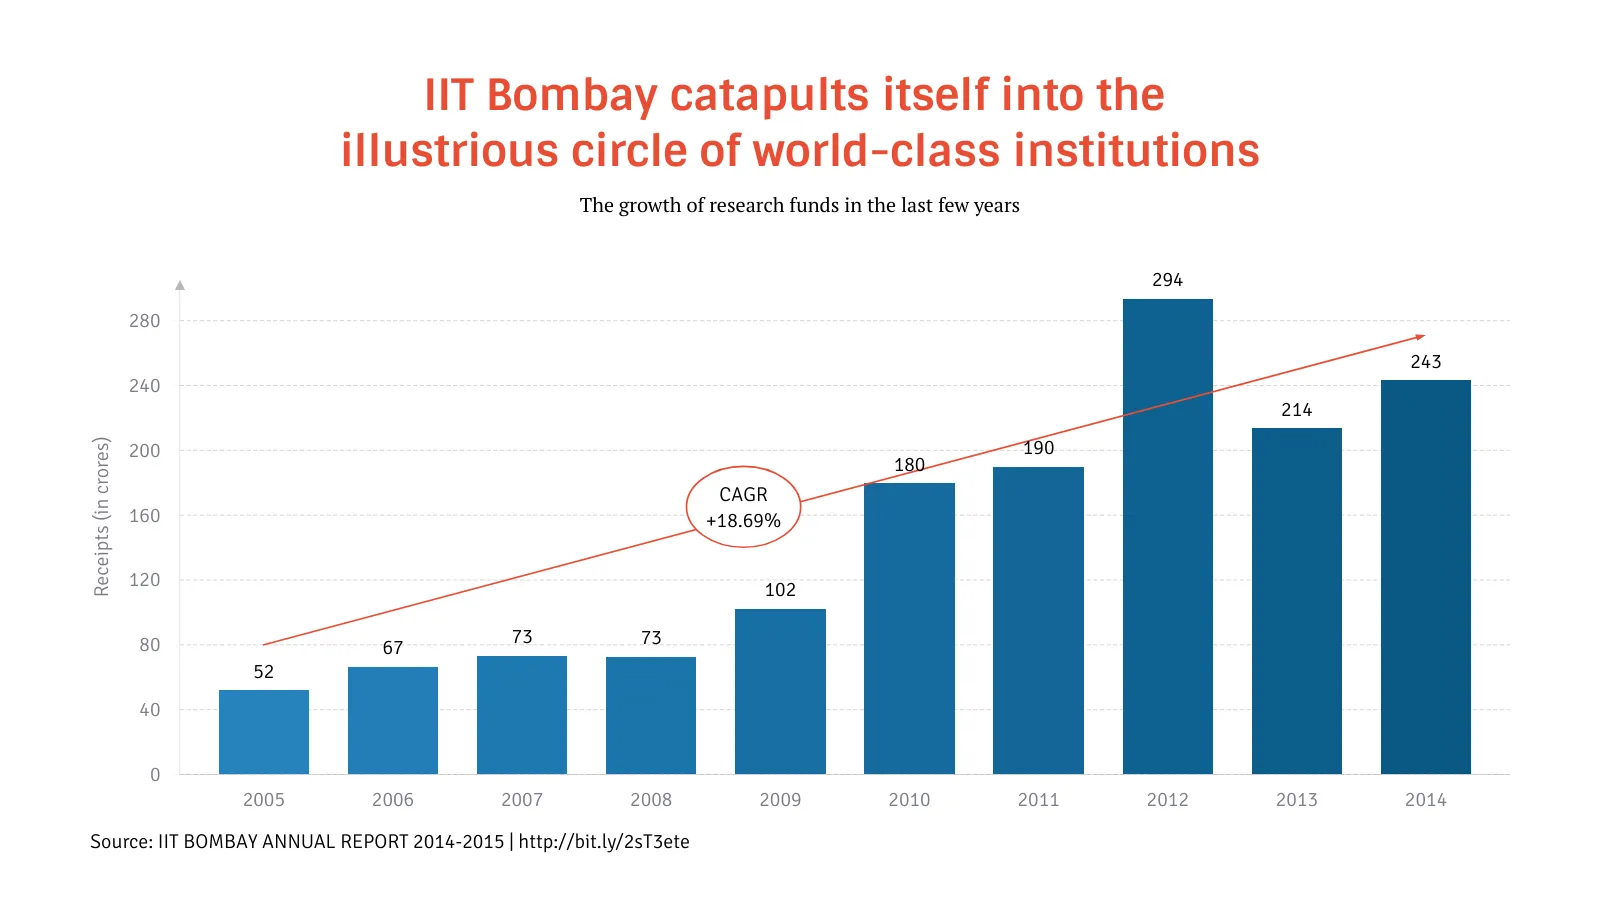 Bar Chart example: IIT Bombay catapults itself into the 
illustrious circle of world-class institutions